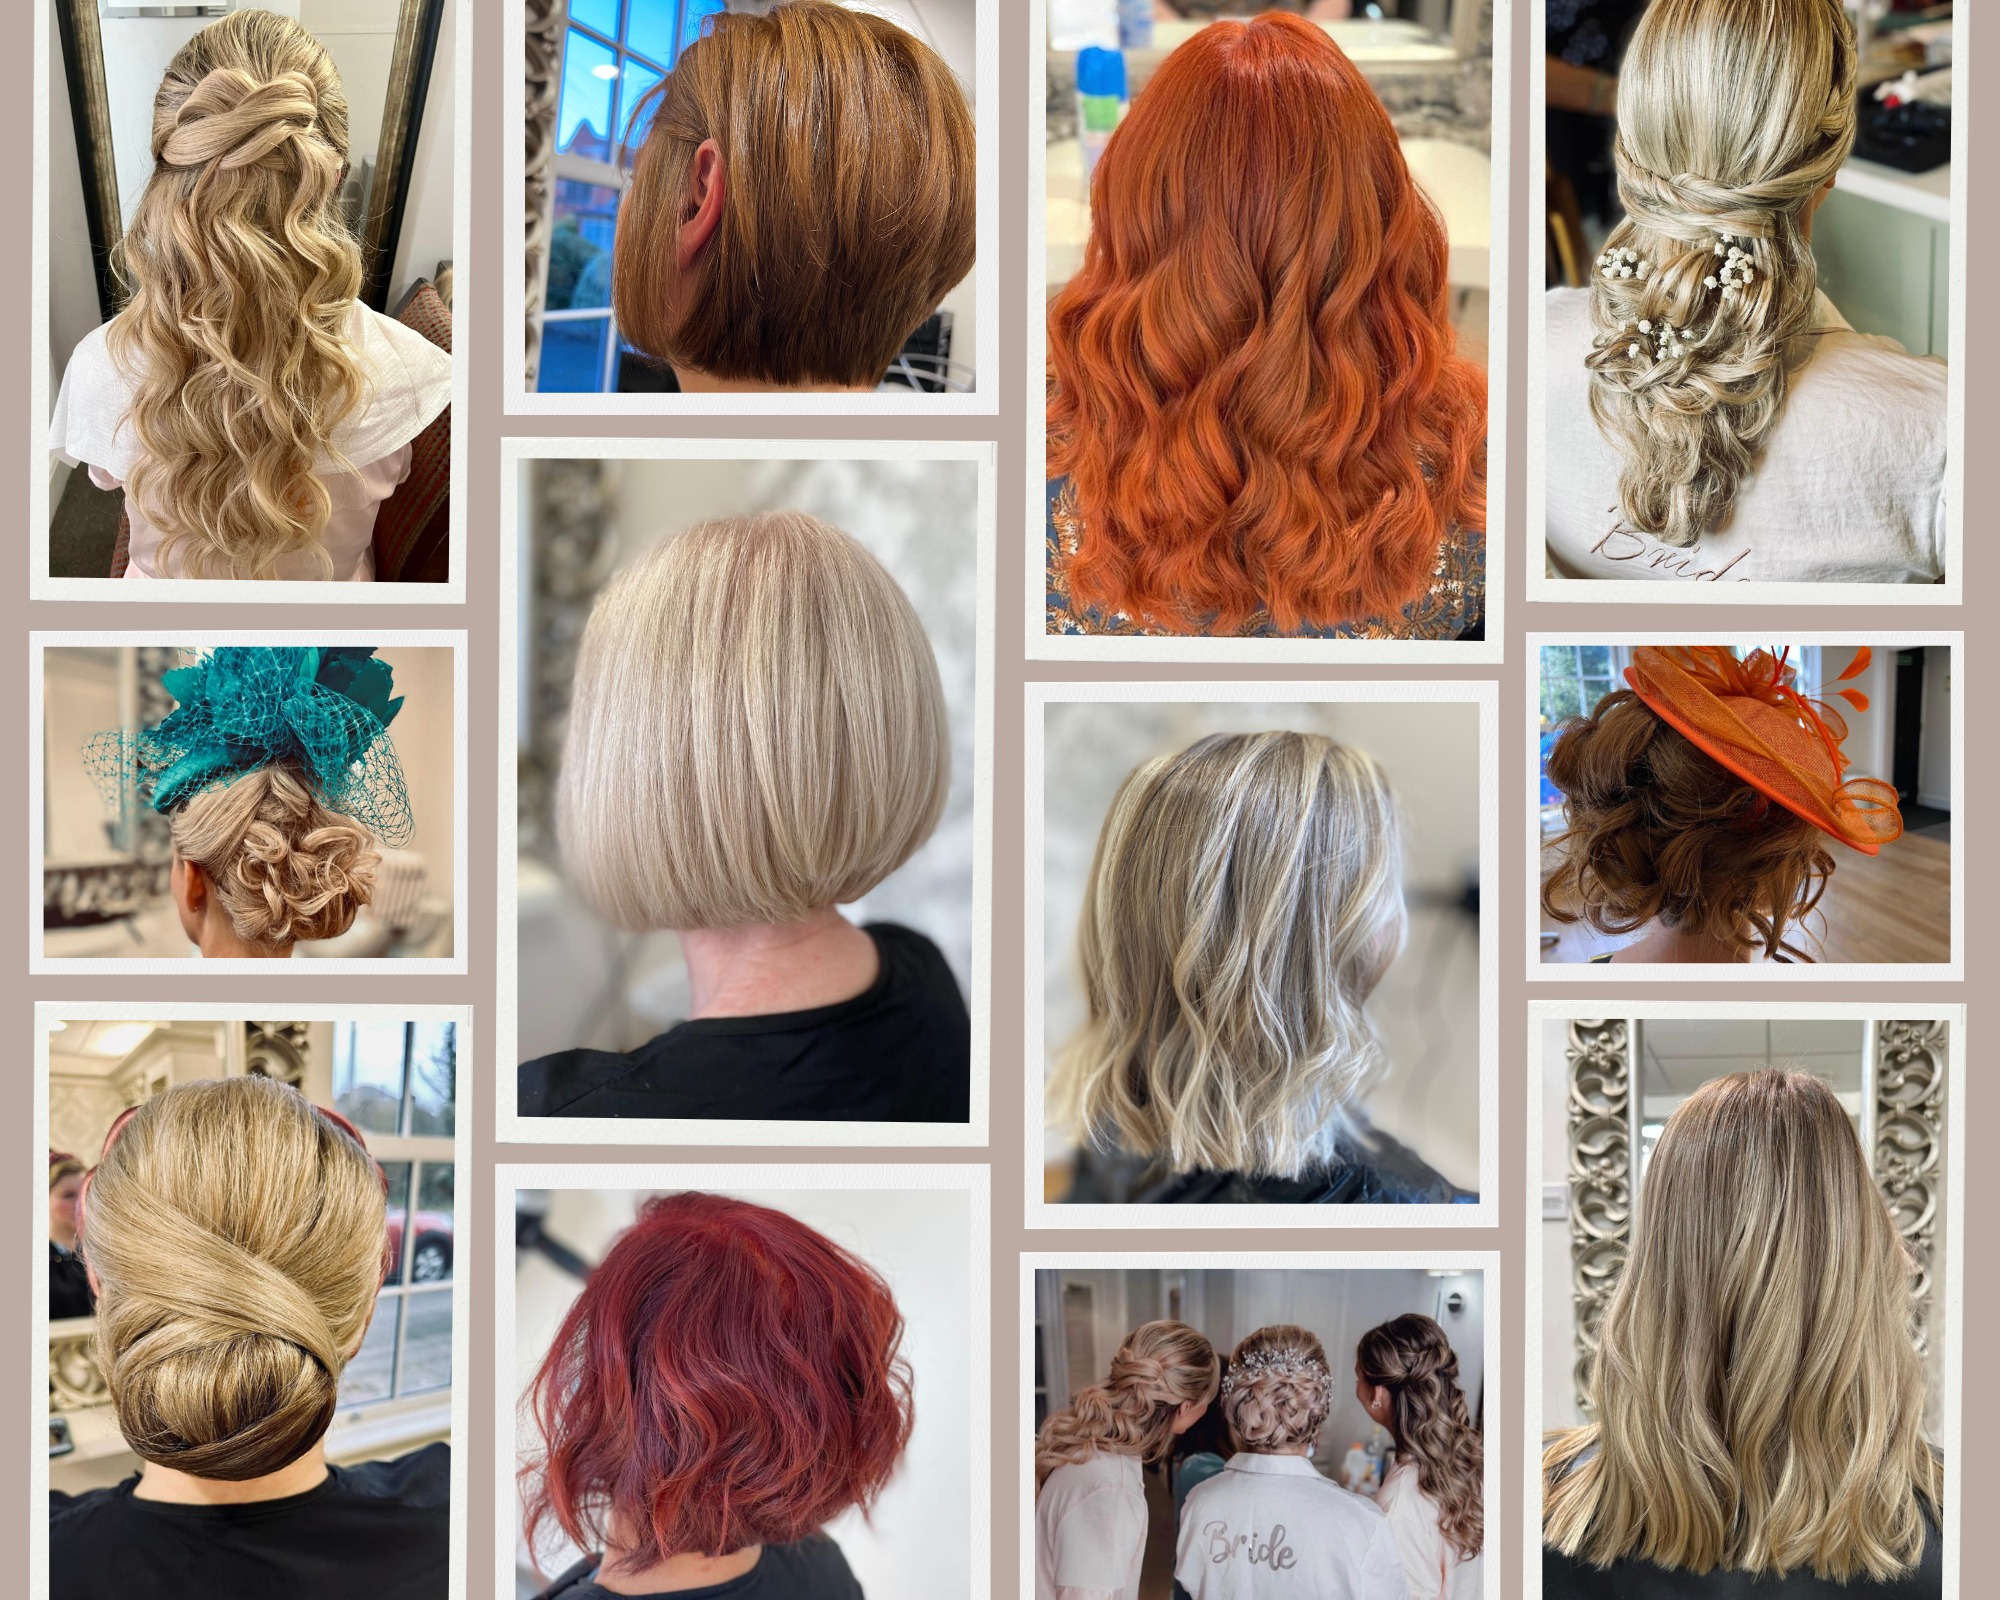 Style, colour and hair-up at The Hair Lounge Rossett.